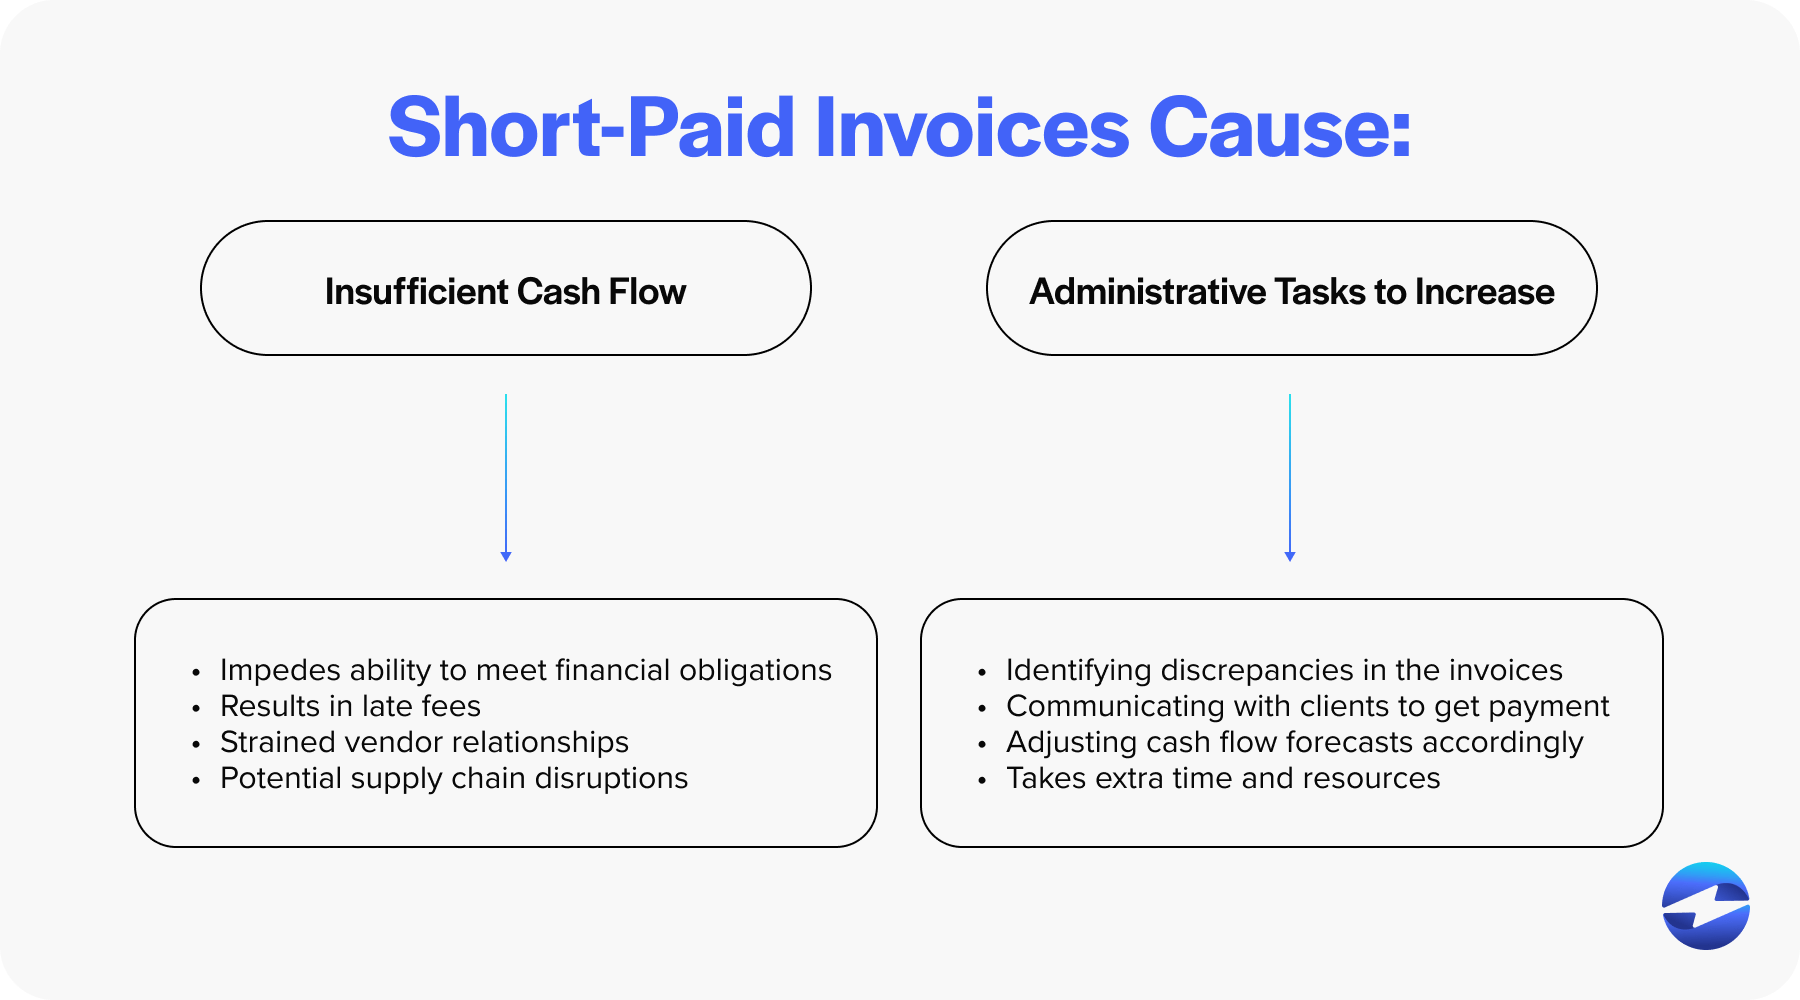 Consequences of Short-Paid invoices